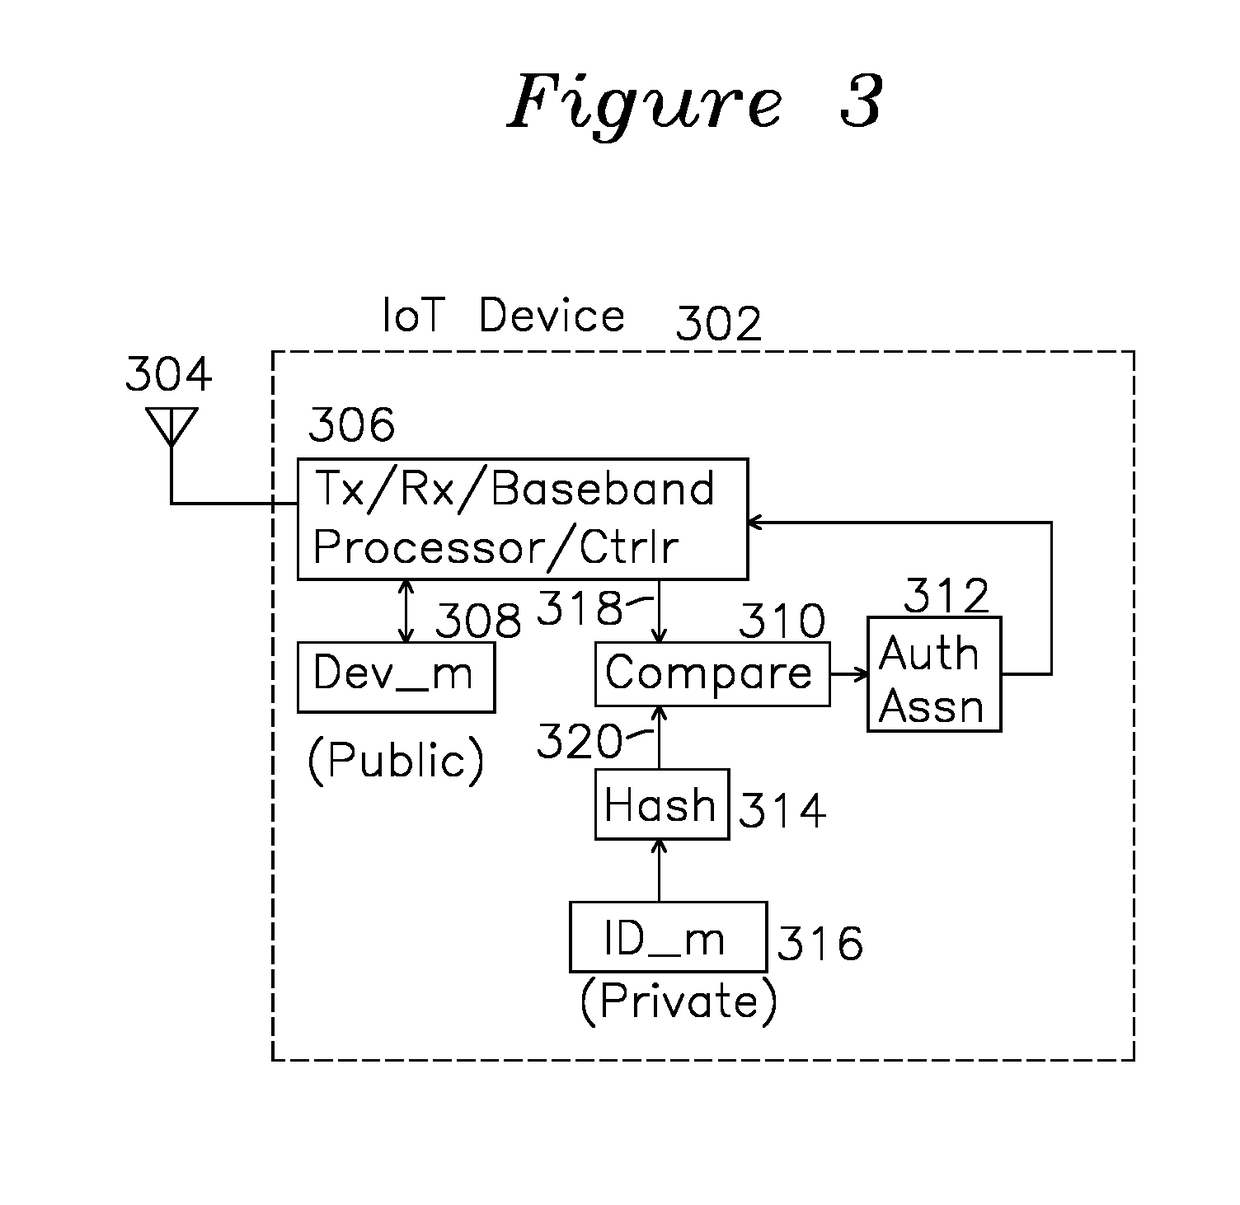 Uncloneable Registration of an Internet of Things (IoT) Device in a Network